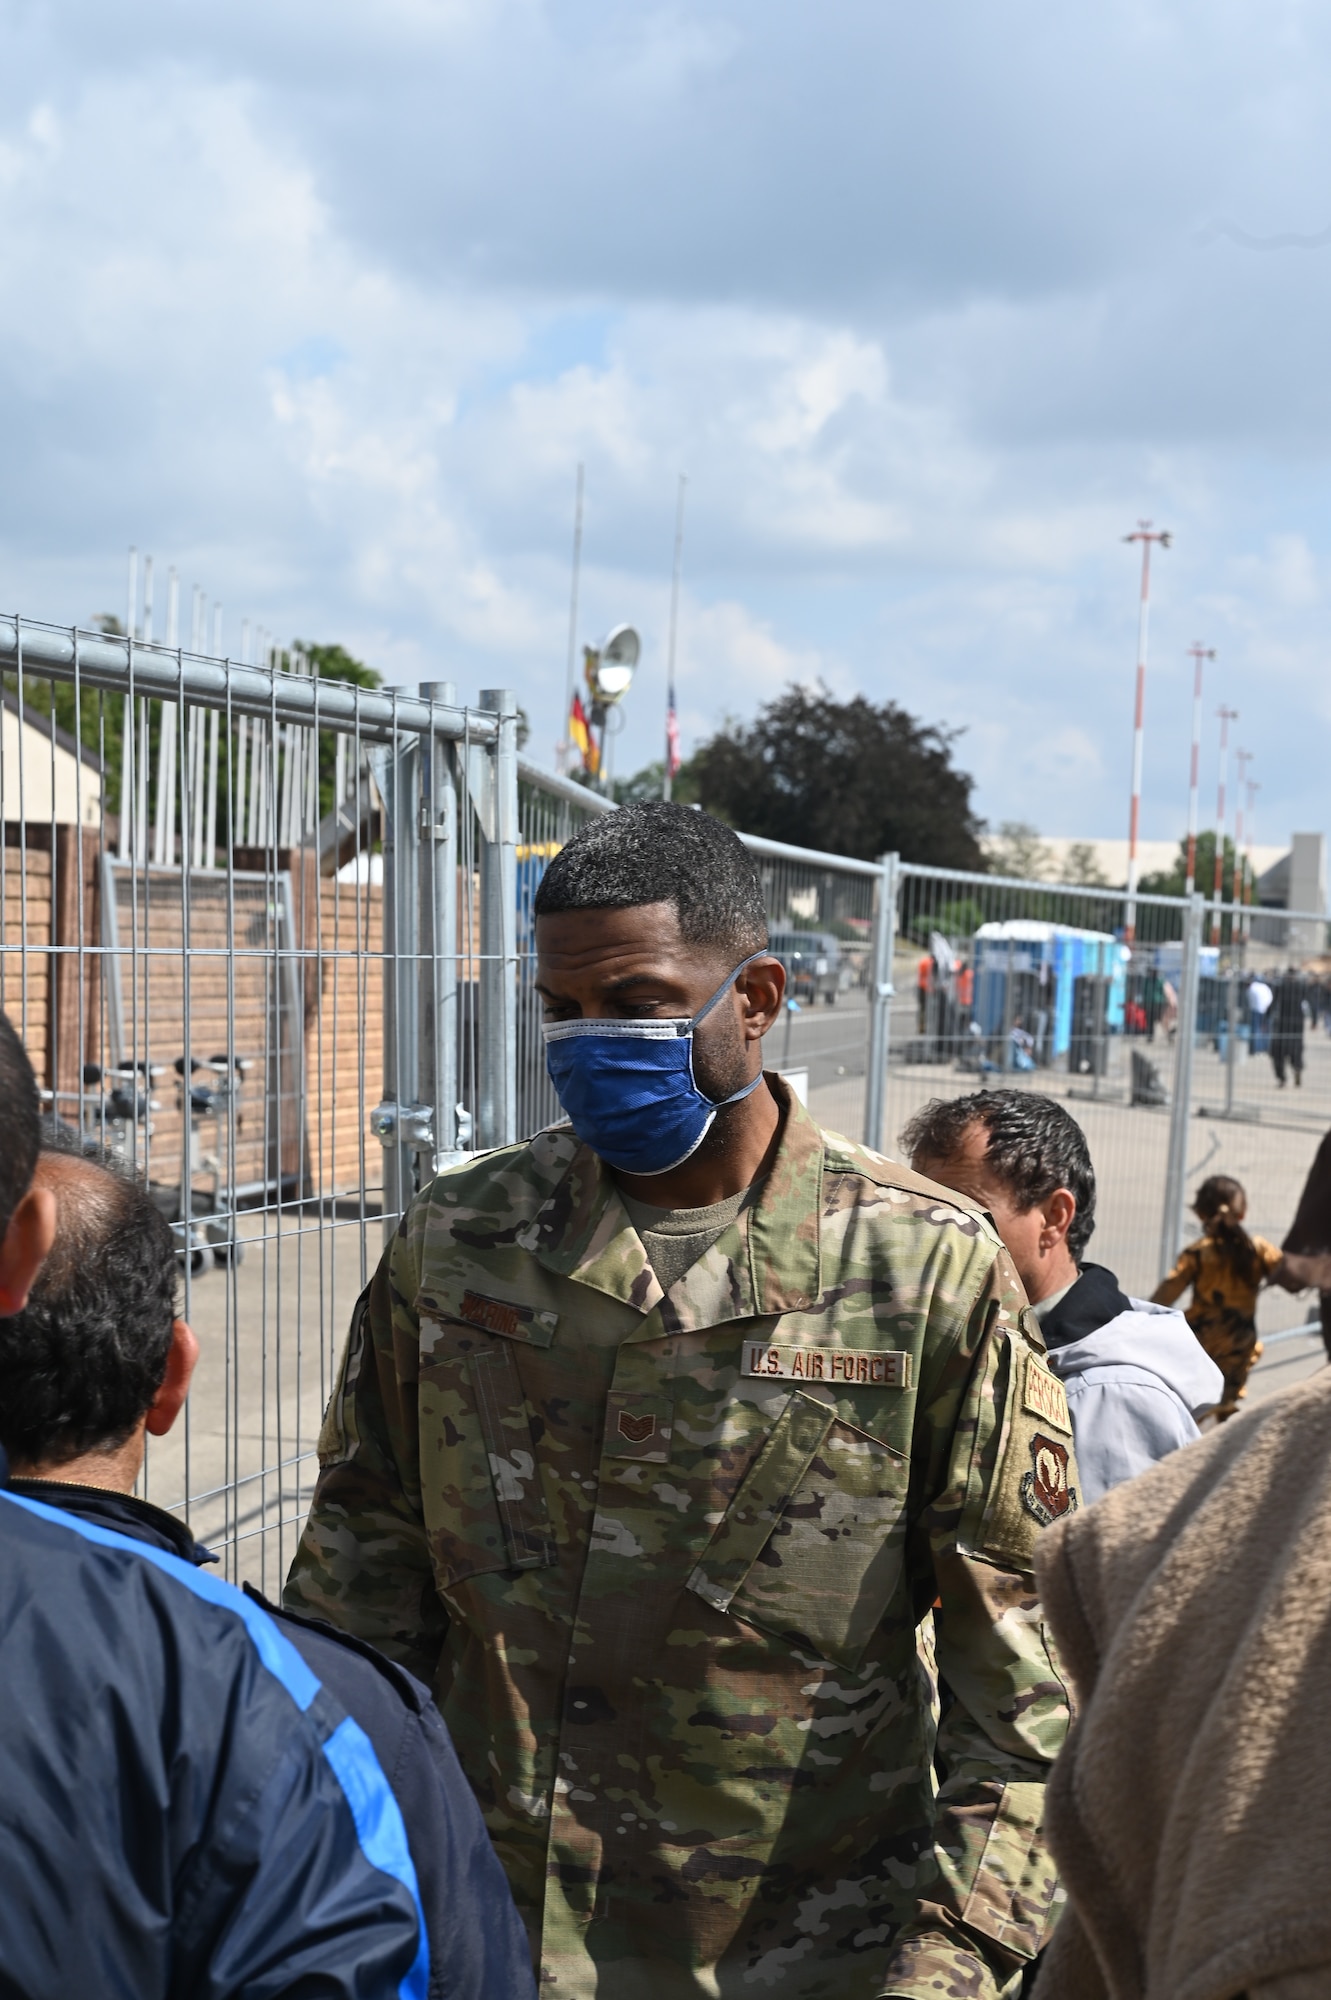 U.S. Air Force Tech. Sgt. Kenton Waring, 435th Air Expeditionary Wing personnel support for contingency operations non-commissioned officer in charge, speaks to evacuees during Operation Allies Refuge at Ramstein Air Base, Germany, Sep. 3, 2021. Over 30,000 evacuees have received support such as temporary lodging, food, medical screening and treatment and more at Ramstein Air Base while preparing for onward movements to their final destinations. (U.S. Air Force photo by Senior Airman Caleb S. Kimmell)